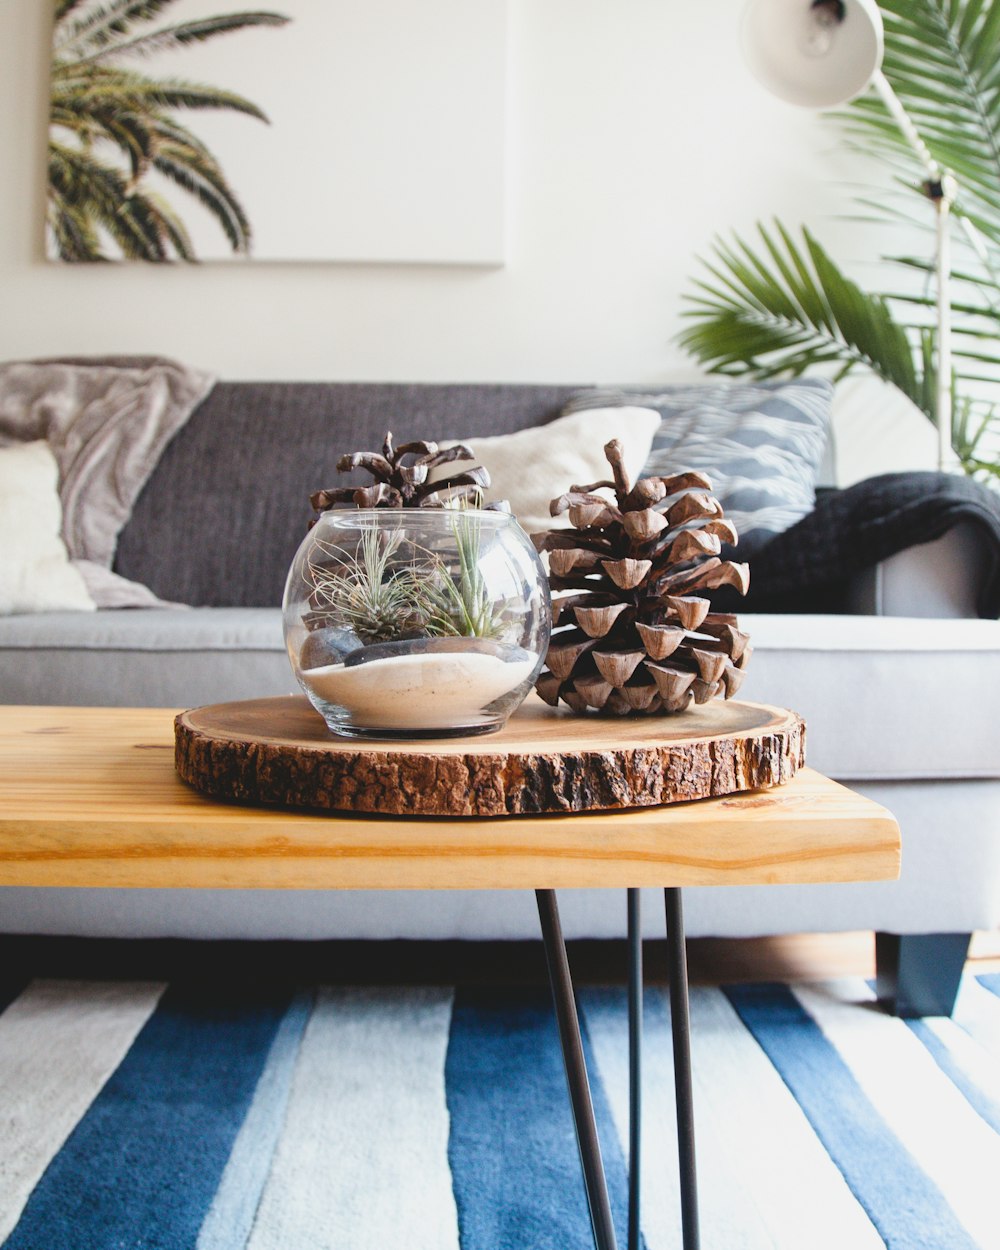 clear fishbowl beside pine cones on brown wooden table